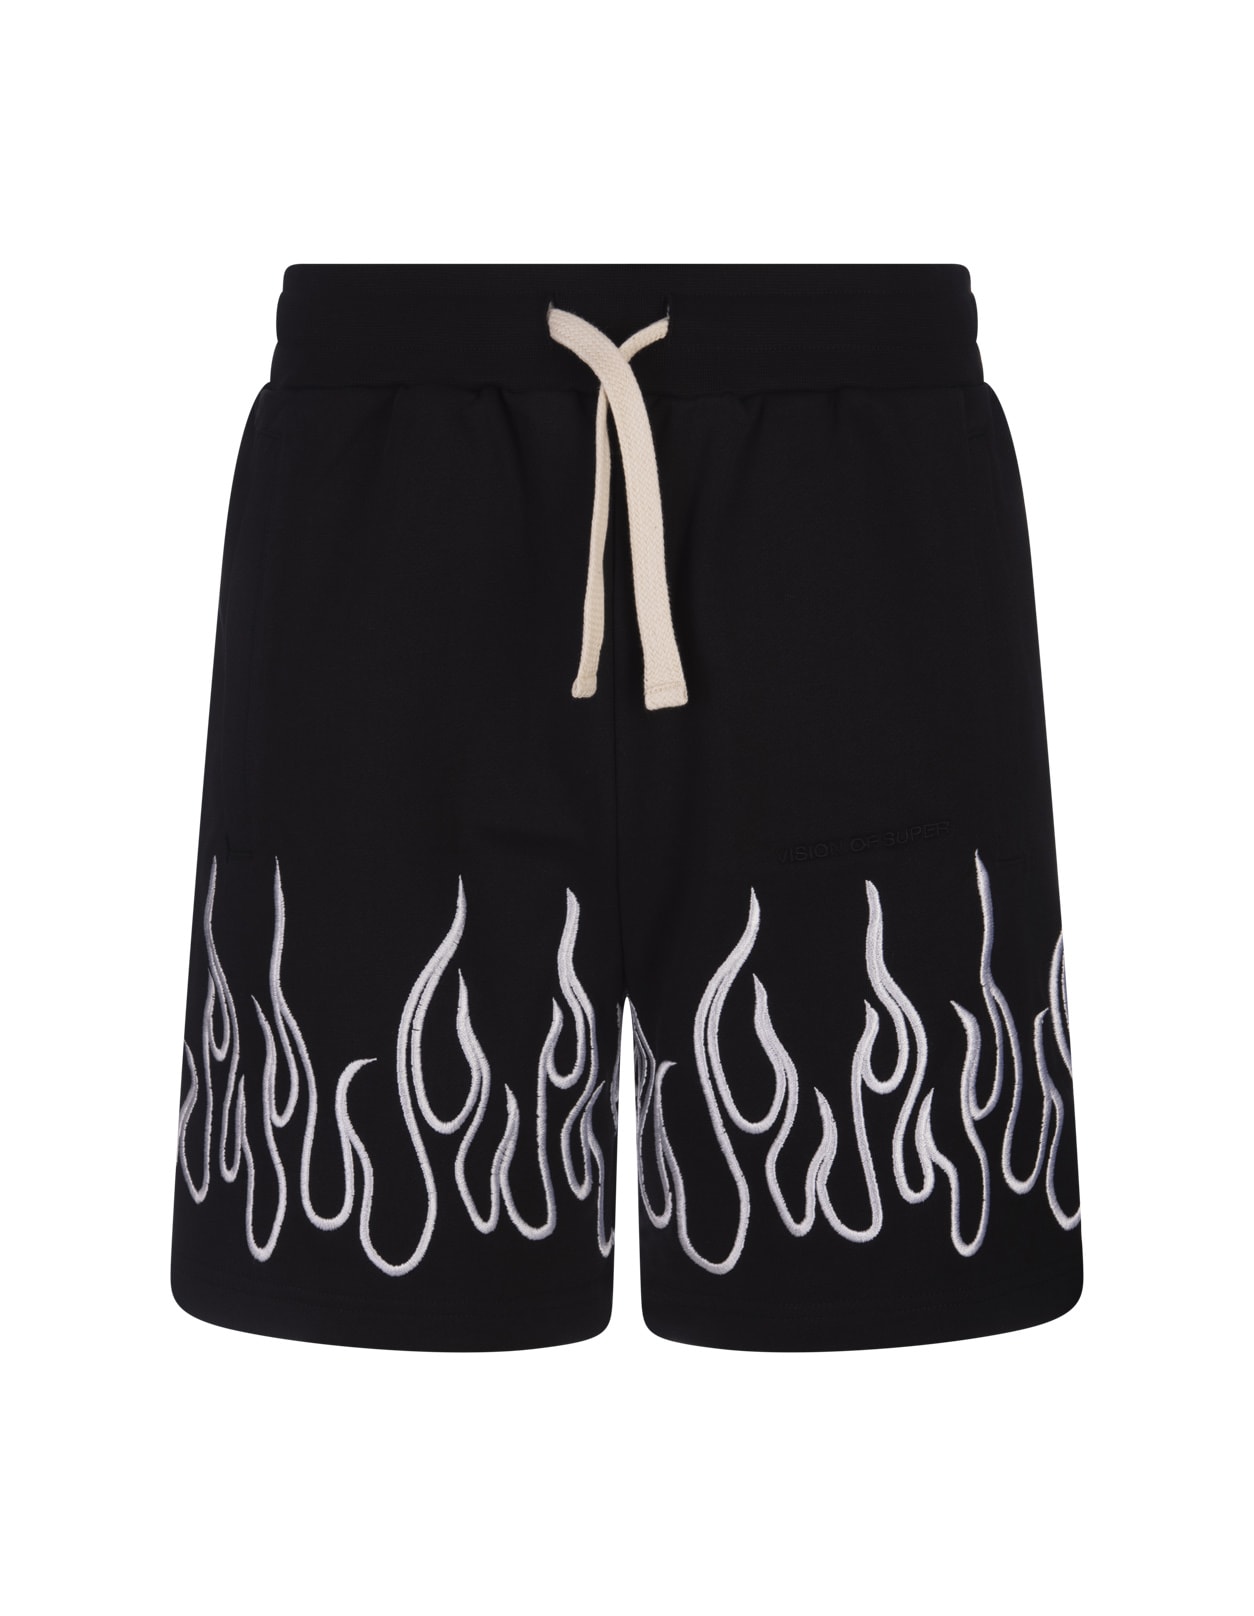 Vision Of Super Black Shorts With Embroidered White Flames